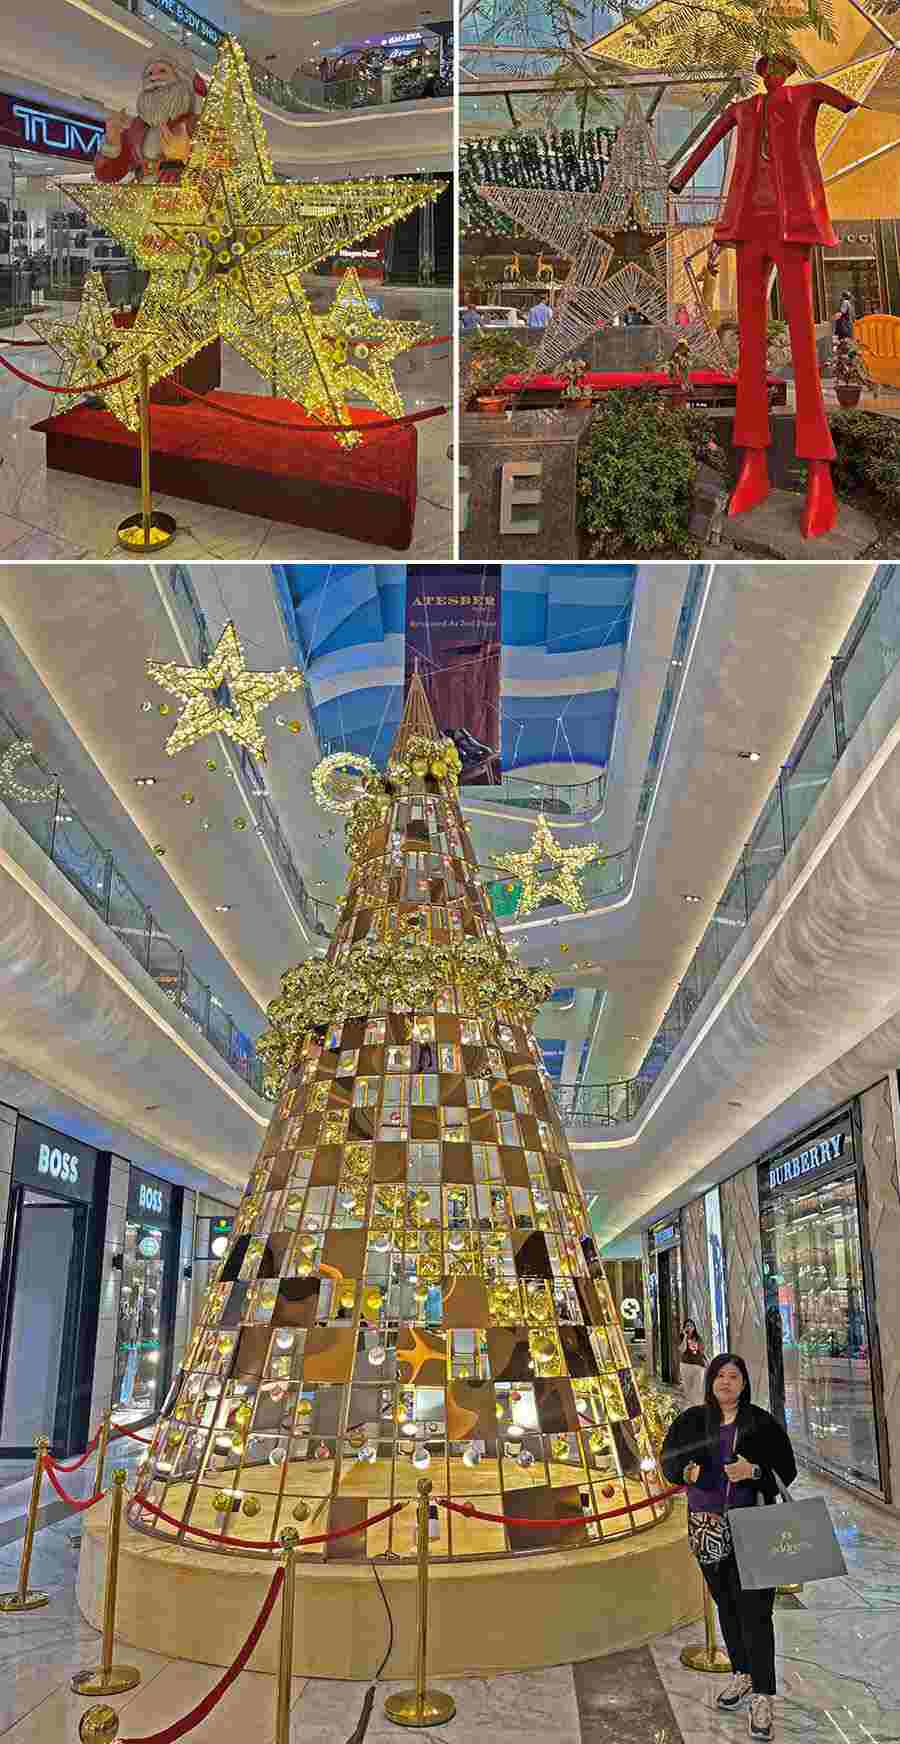 Quest Mall is ready to welcome shoppers with its Christmas decoration in place